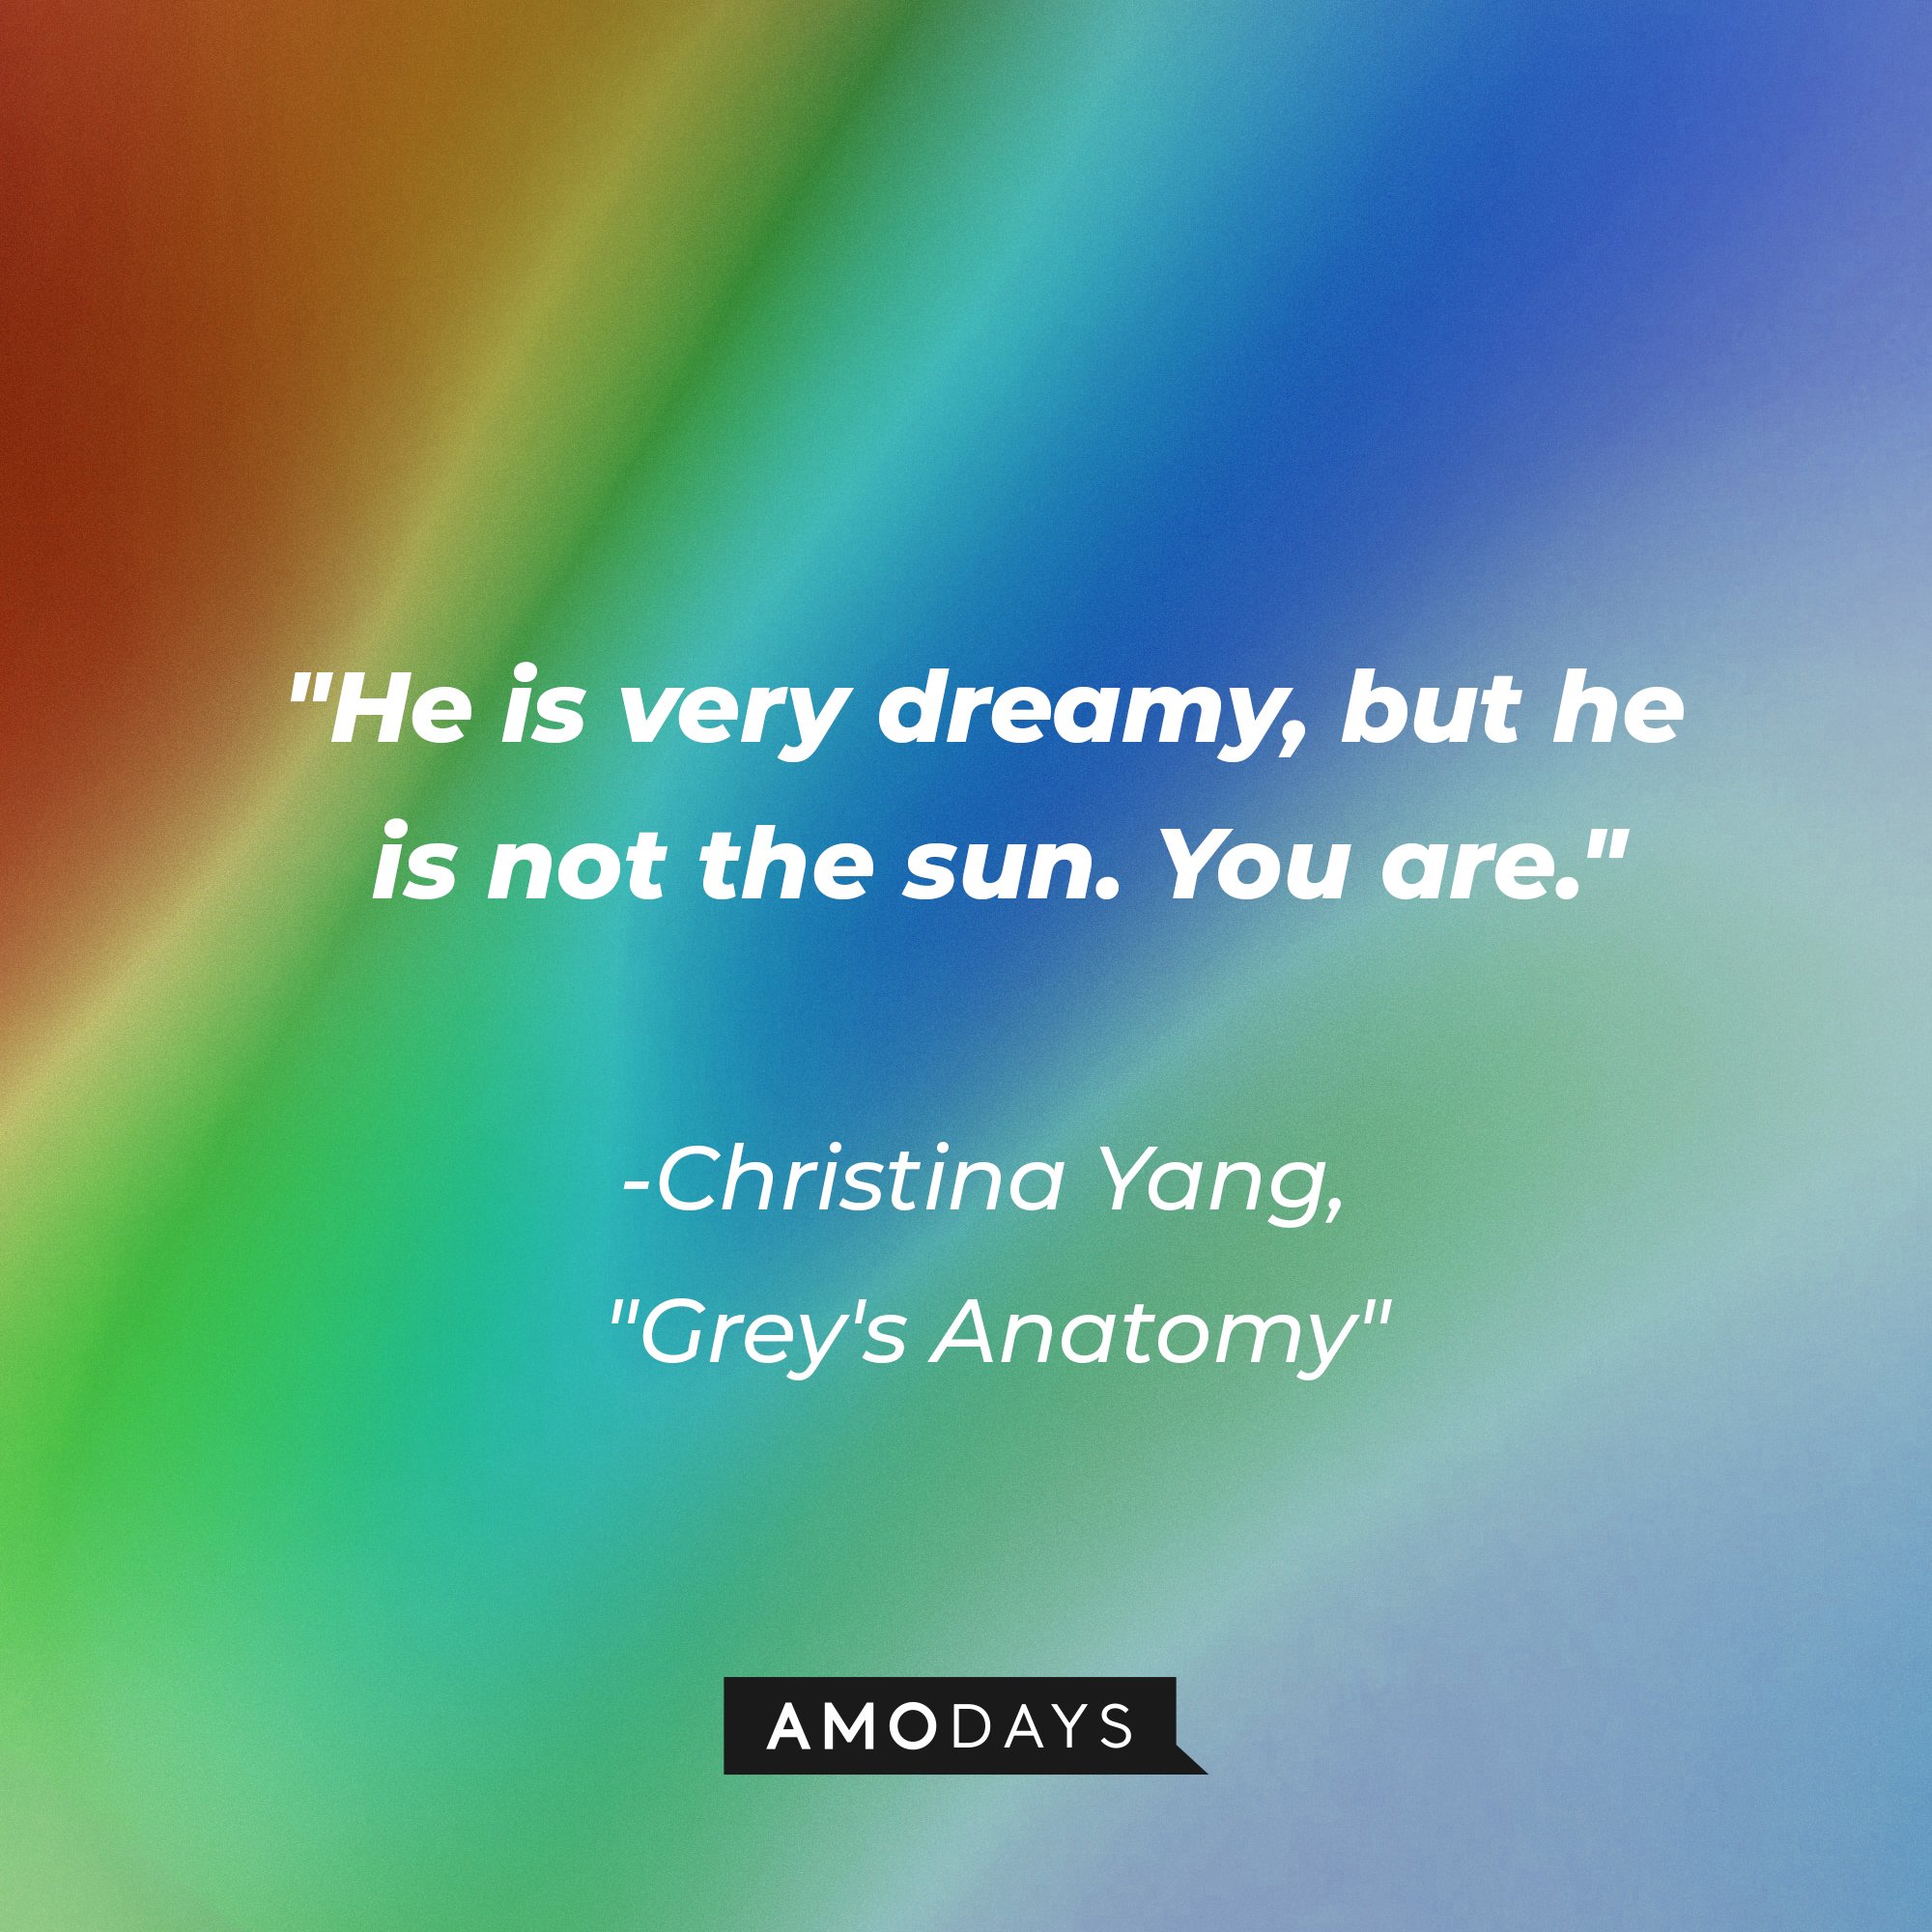 Christina Yang's Grey's Anatomy quote: "He is very dreamy, but he is not the sun. You are." | Image: AmoDays